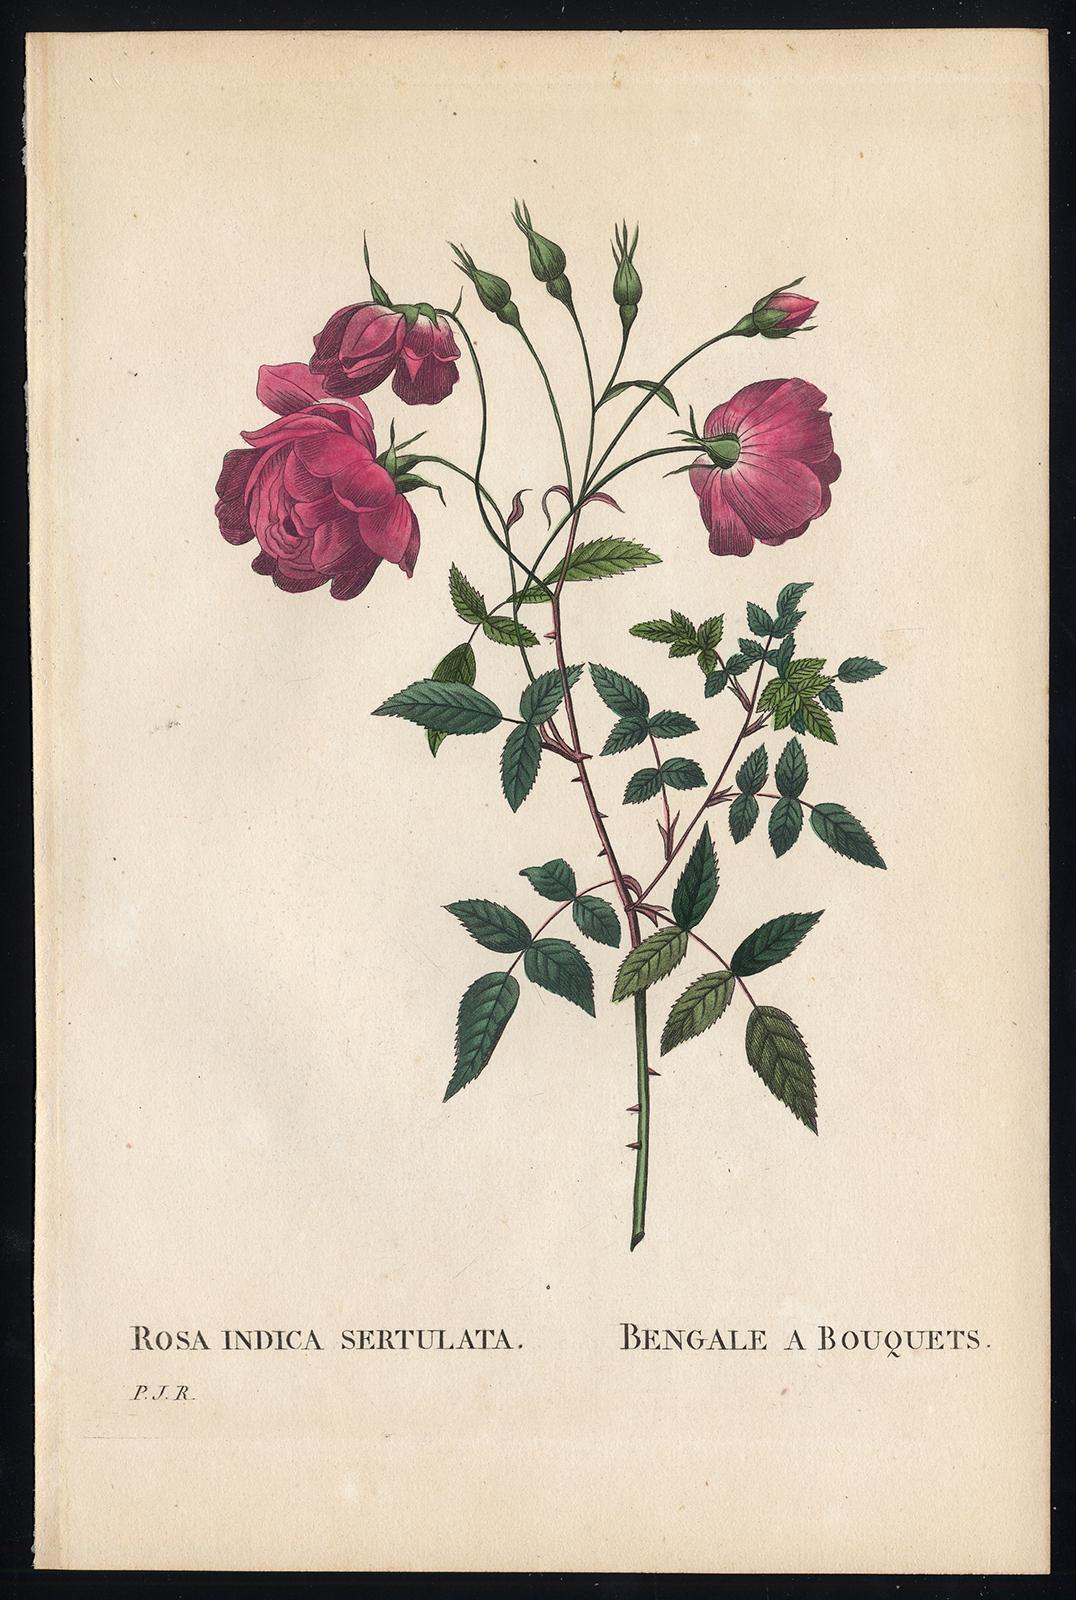 Pierre-Joseph Redouté Print - China Rose by Redoute - Les Roses - Handcoloured engraving - 19th century